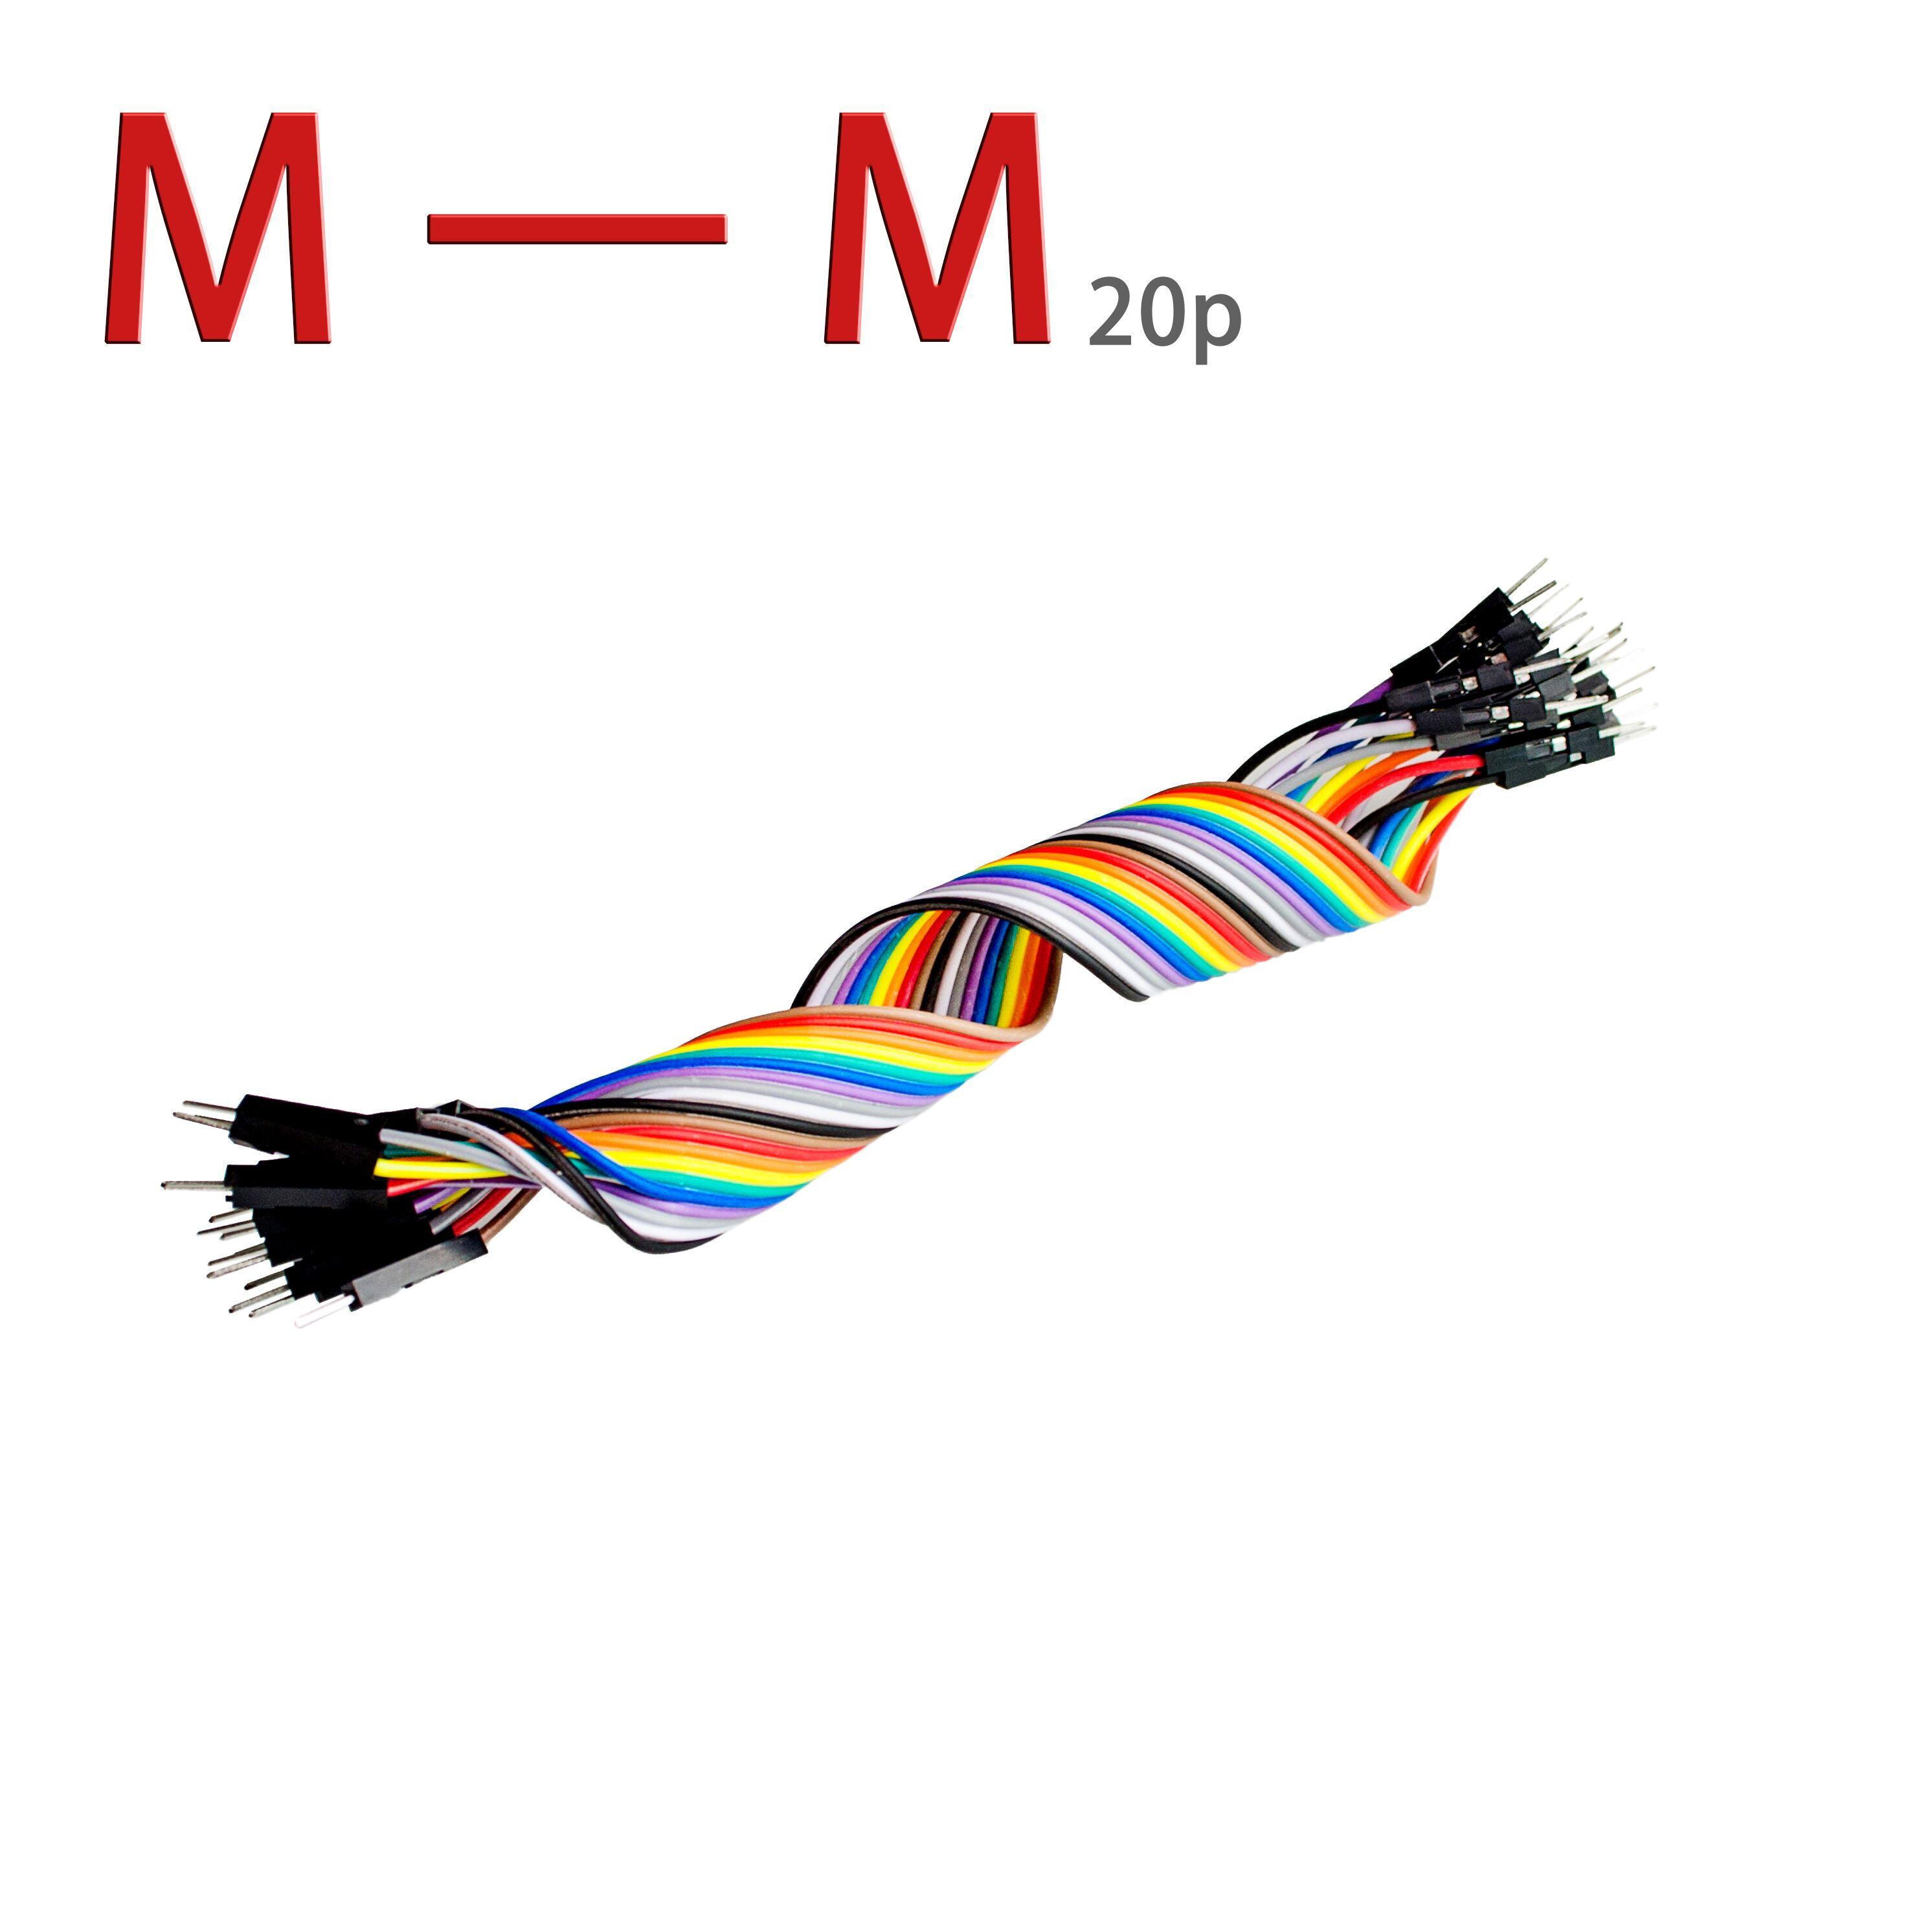 20pcs-20cm-2-54mm-1p-1p-Pin-Male-to-Male-Color-Breadboard-Cable-Jump-Wire-Jumper-For